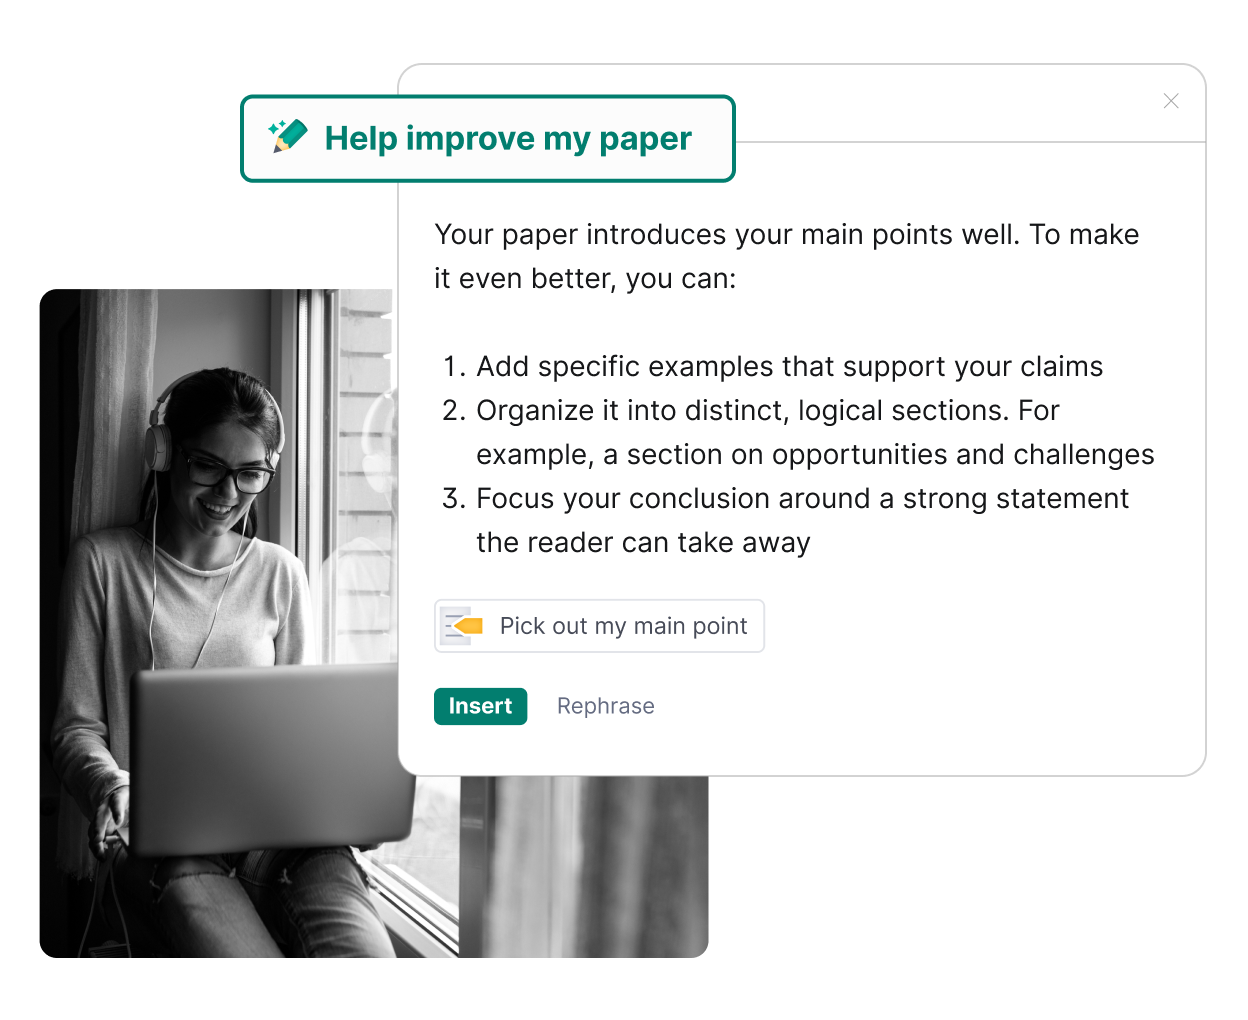 Grammarly product example shows how to help improve your paper